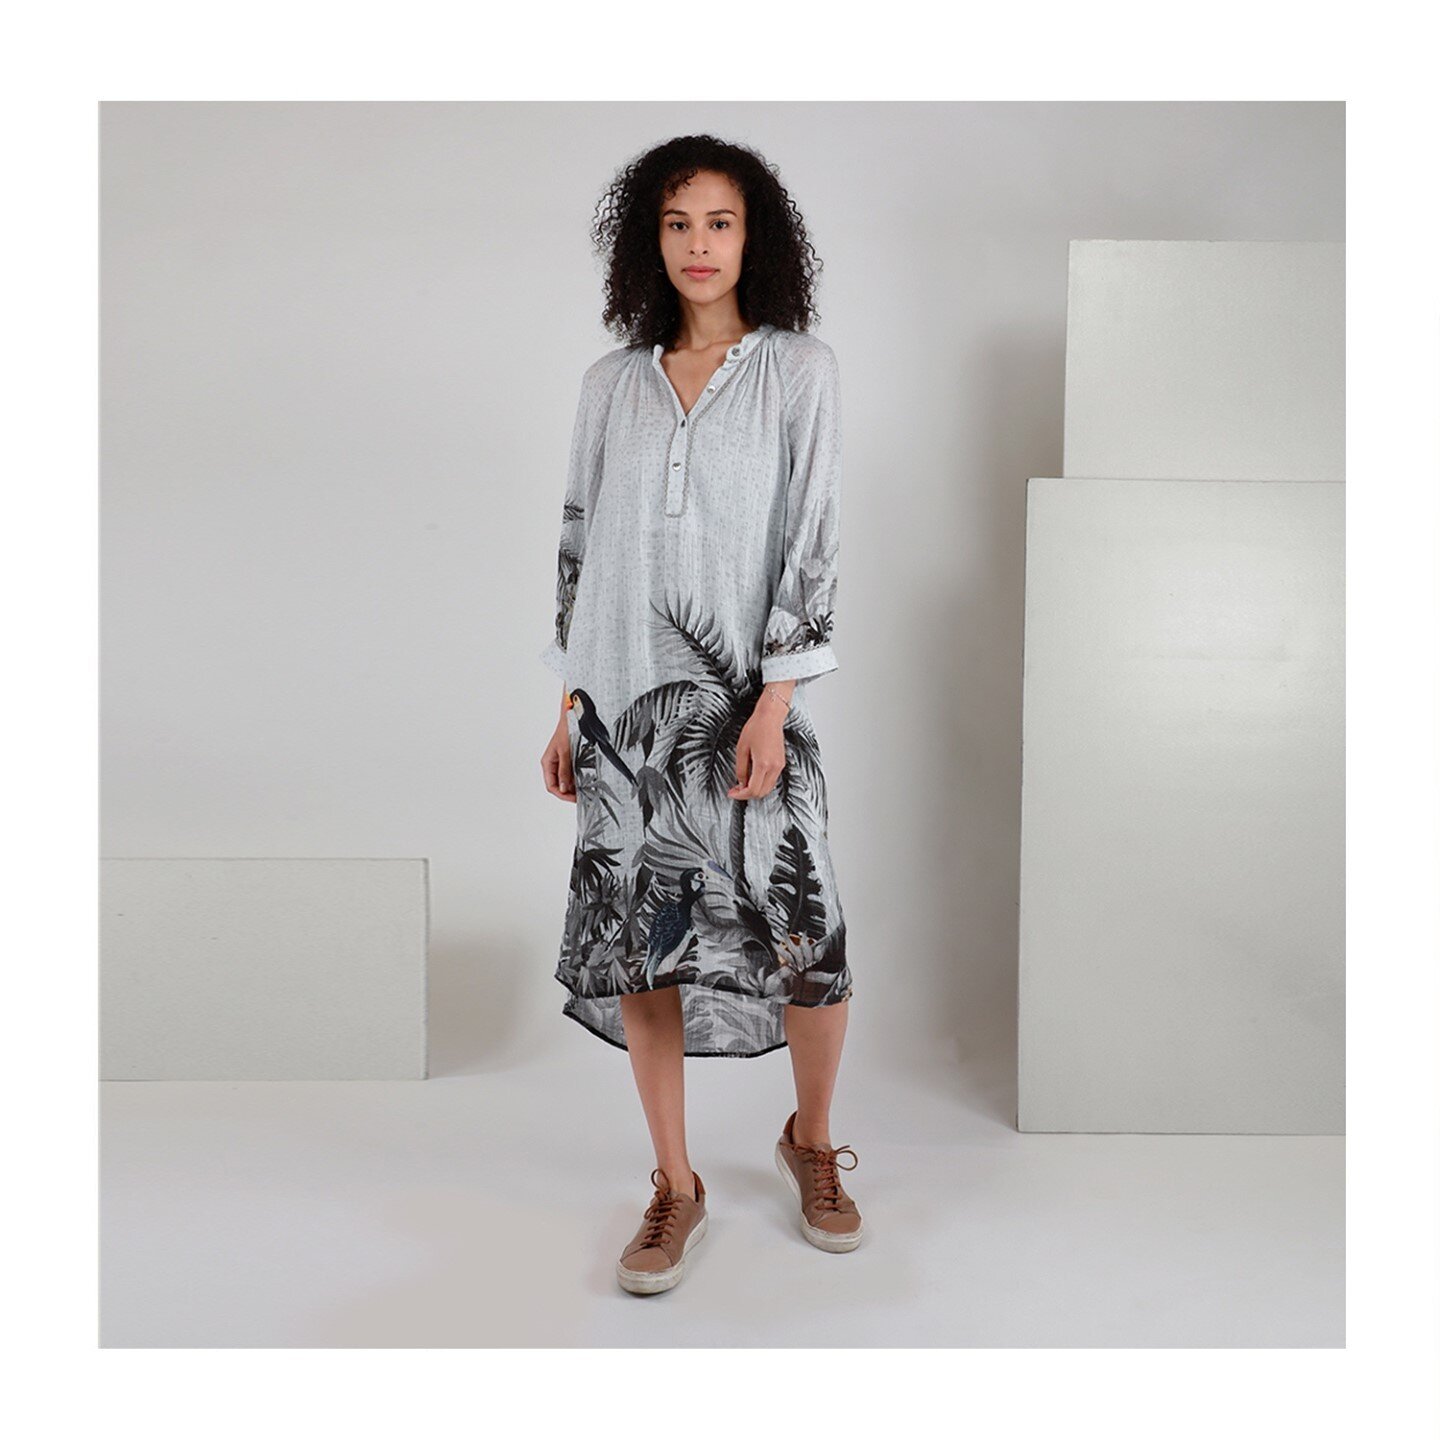 One more timeless tunic  featuring our favorite transitional colored jungle print.  Slip on and relax in this super cotton gauze in style with a g&amp;t in the garden or explore far flung sandy beaches, either way sure to be delighted with this versa